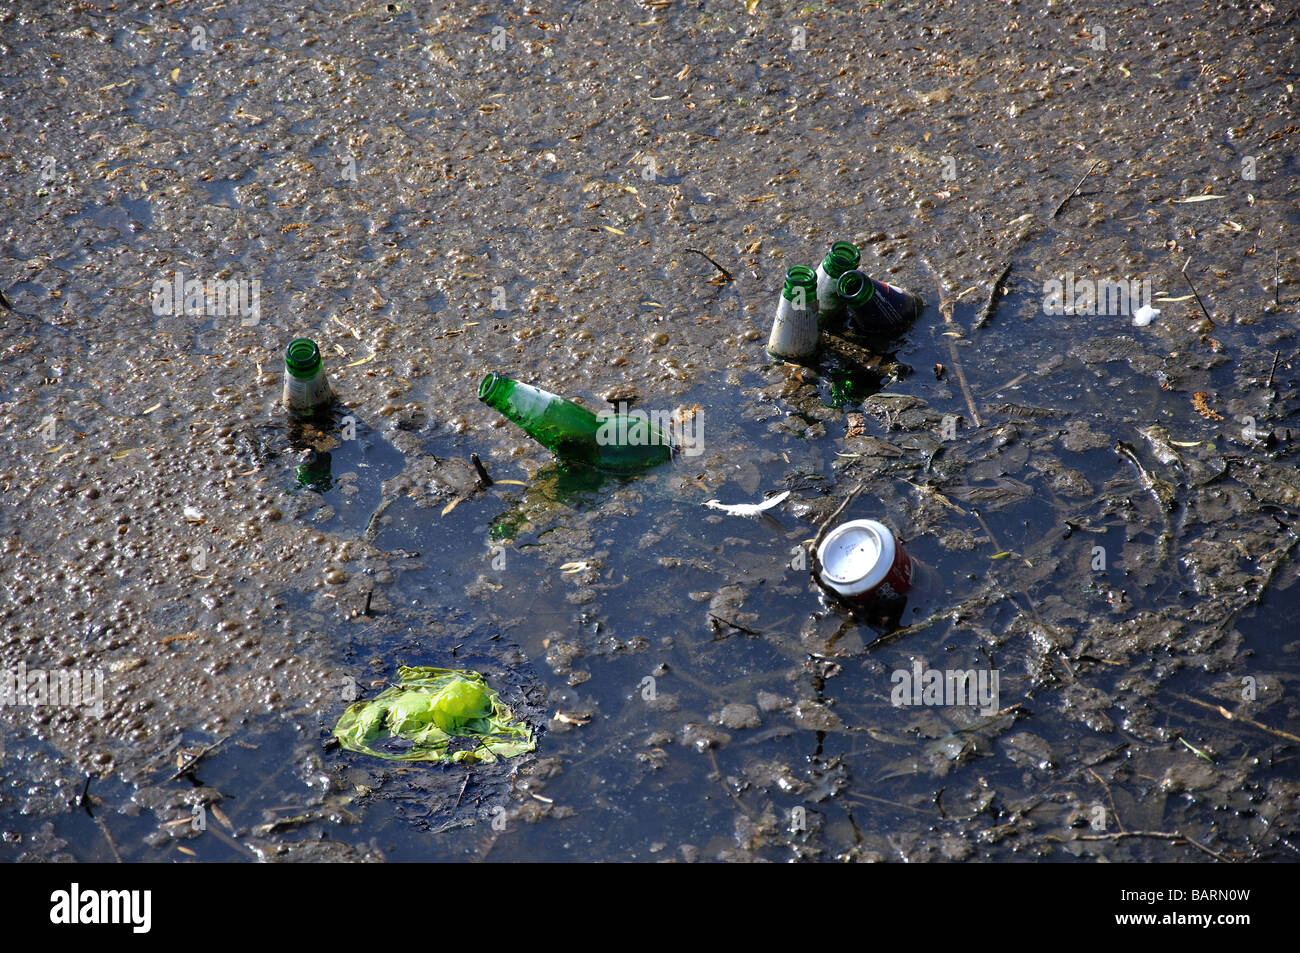 Rubbish in water, South Pond, Midhurst, West Sussex, England, United Kingdom Stock Photo